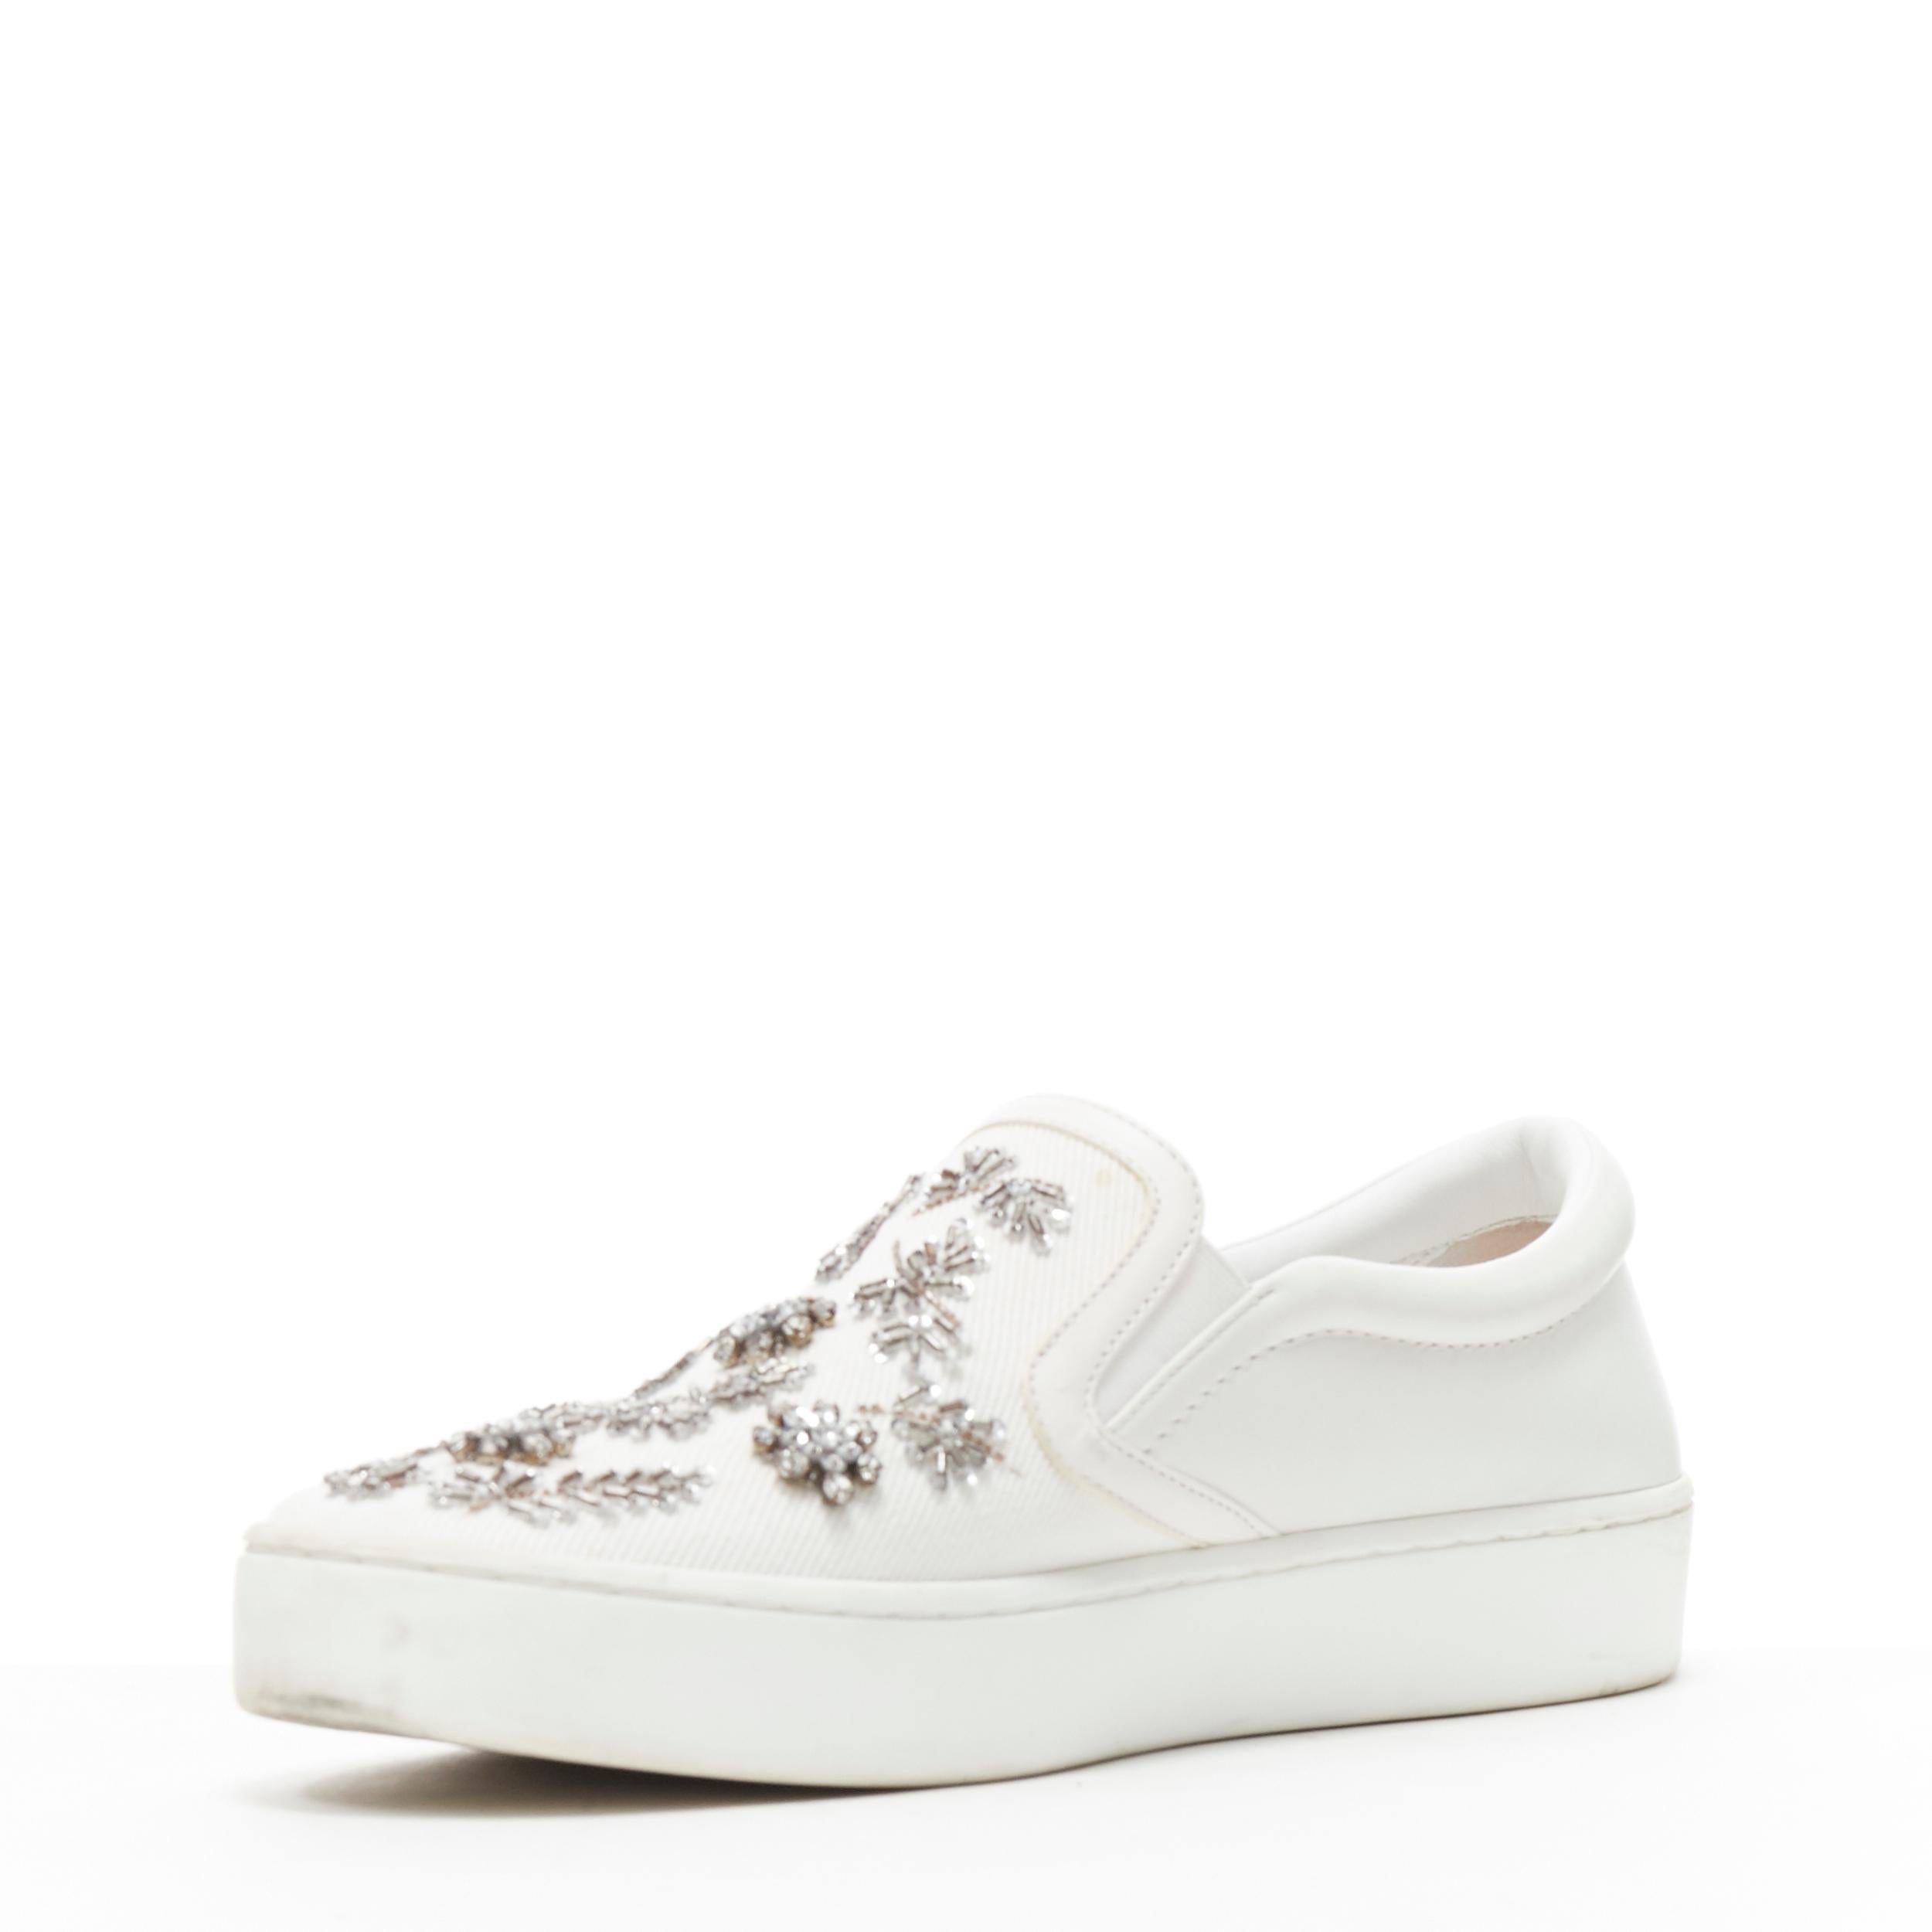 CHRISTIAN DIOR white bead crystal embellished low top skate 